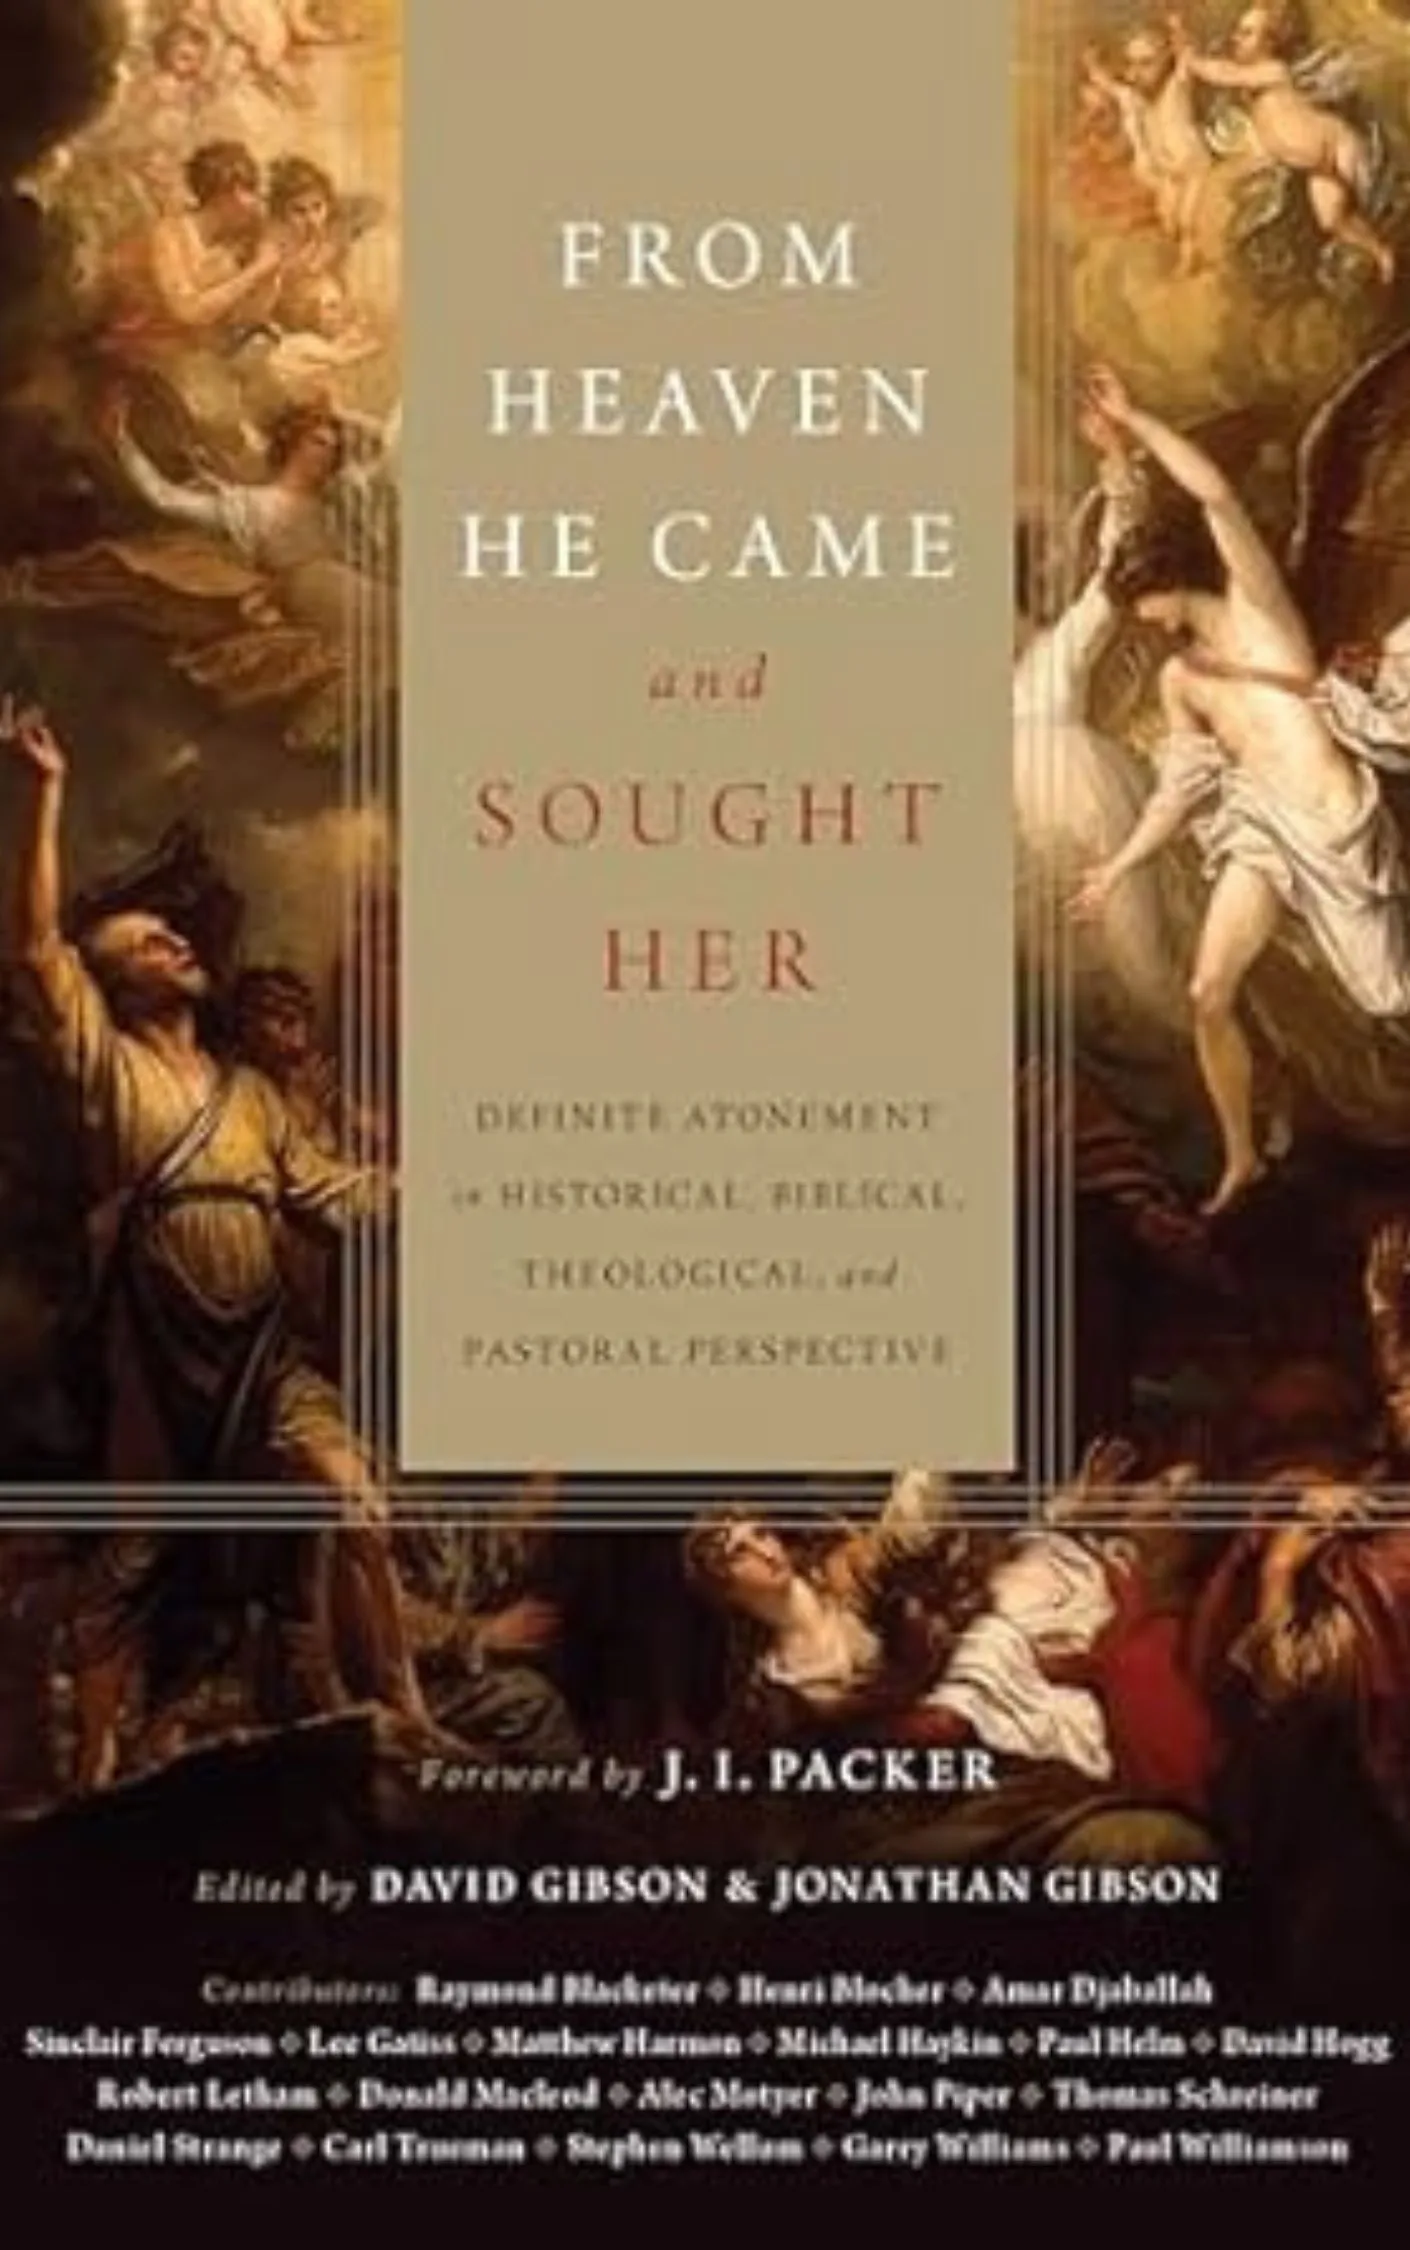 From Heaven He Came and Sought Her: Definite Atonement in Historical, Biblical, Theological, and Pastoral Perspective by David Gibson and Jonathan Gibson